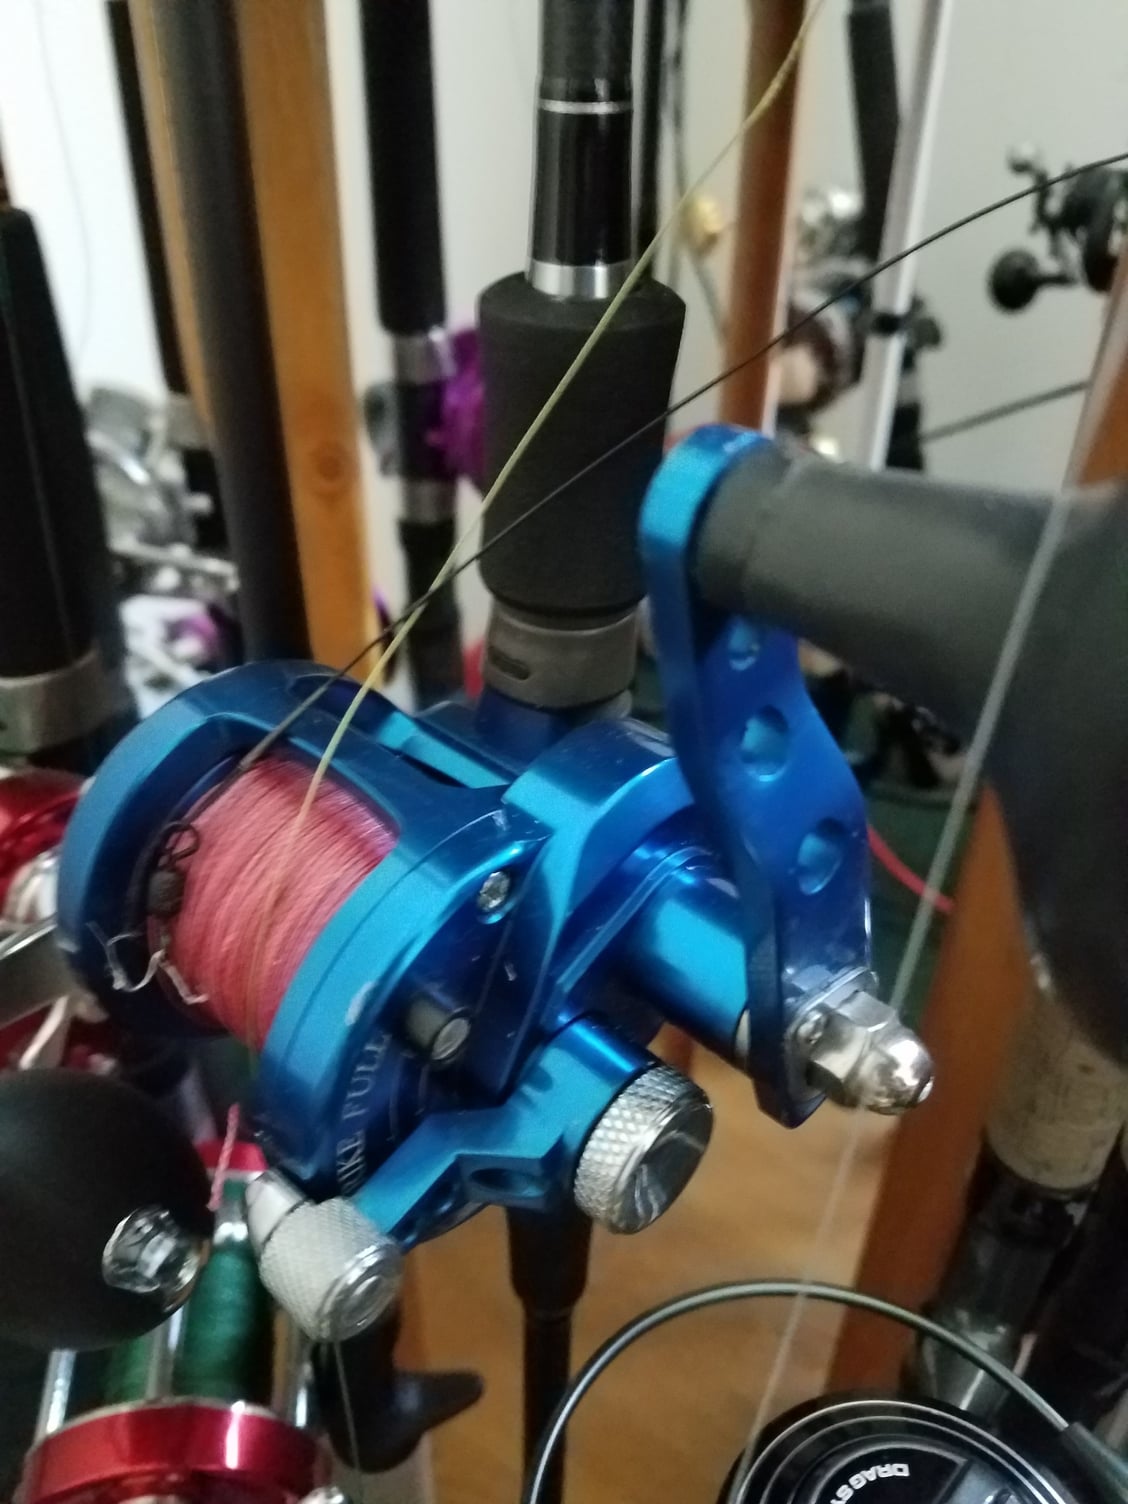 Avet sx 5.3 reels for sale - The Hull Truth - Boating and Fishing